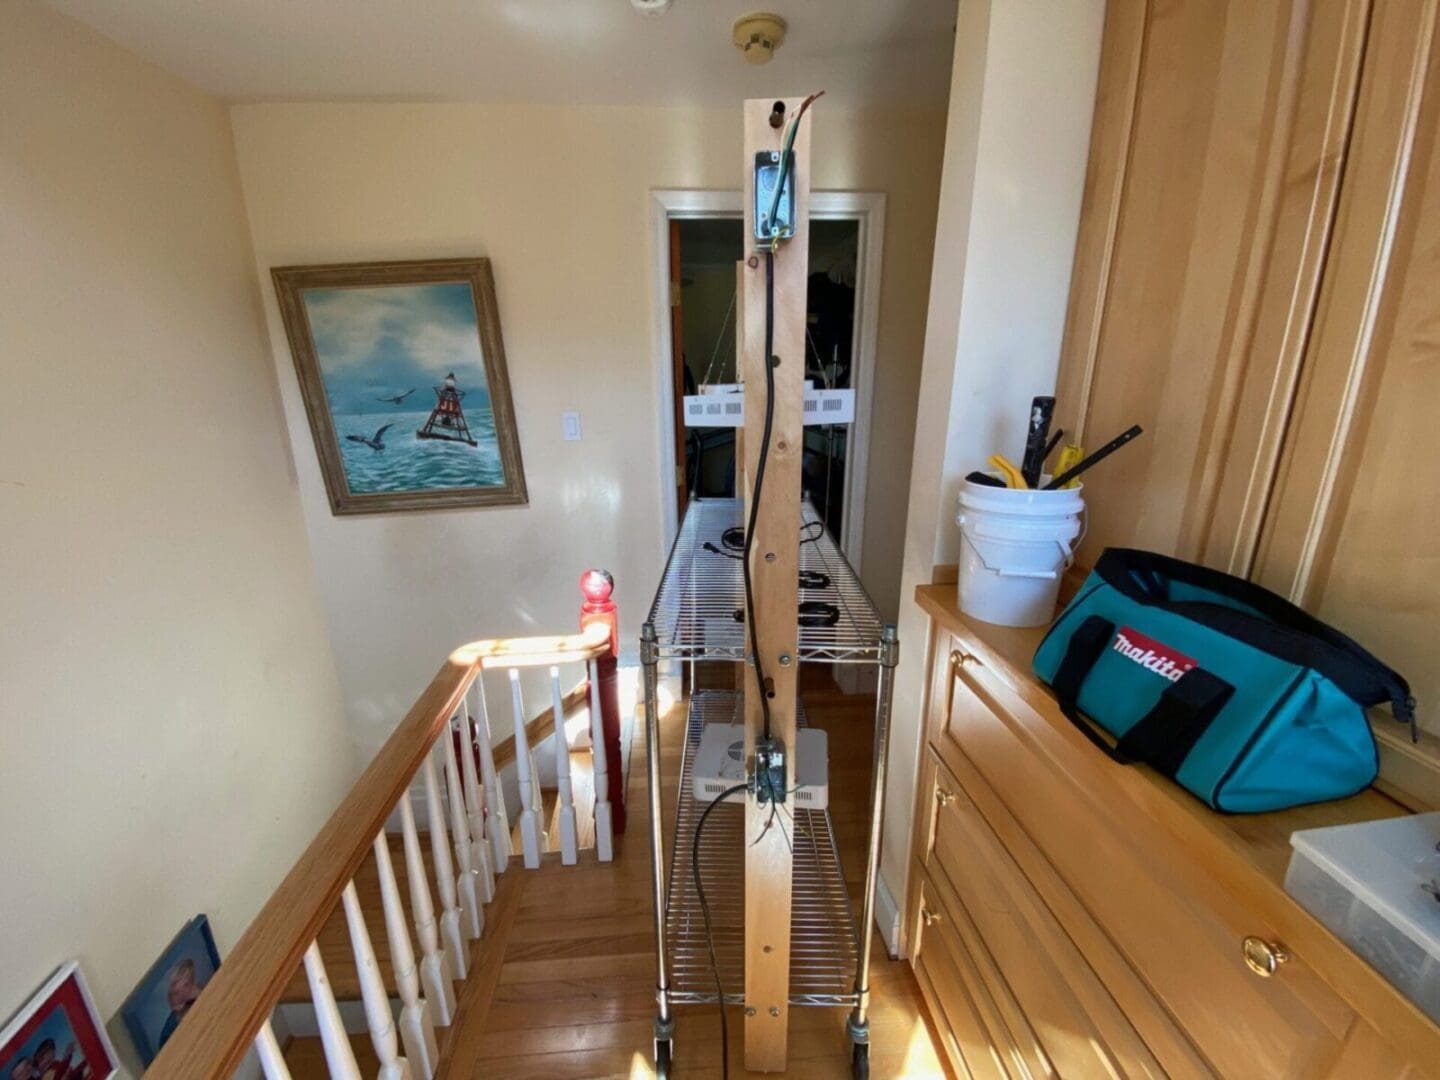 A ladder on a stairway with a tool on it.